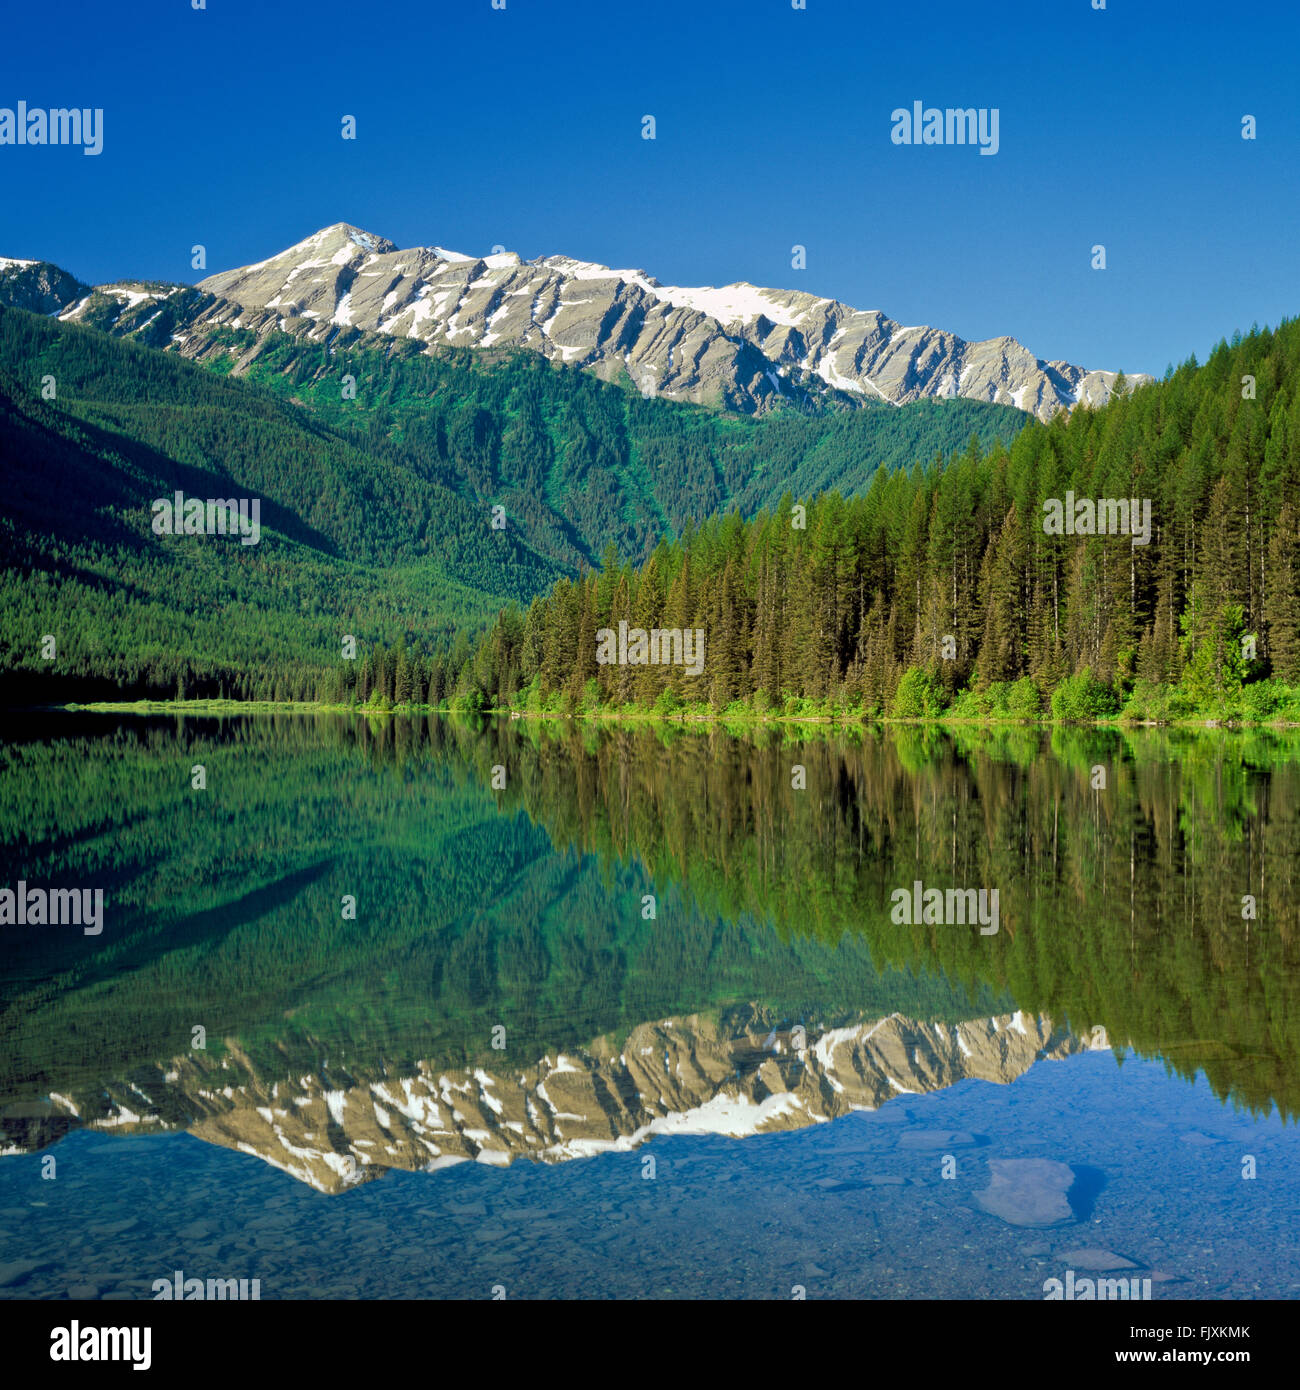 great northern mountain reflected in stanton lake in the great bear wilderness near essex, montana Stock Photo